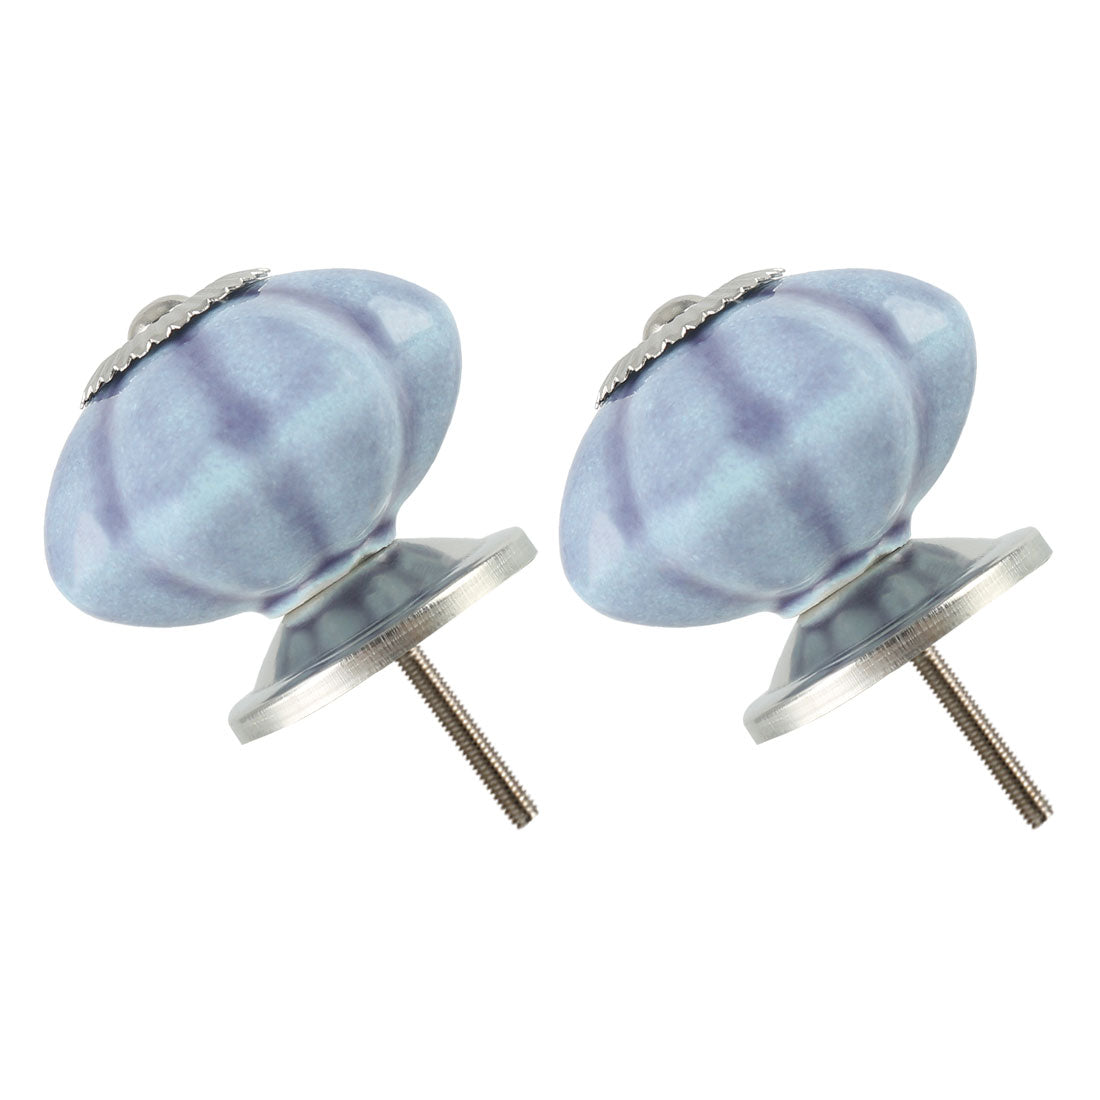 uxcell Uxcell Ceramic Knob Hand Painted Drawer Handle Cabinet Accessory 41mm, Slateblue 2pcs